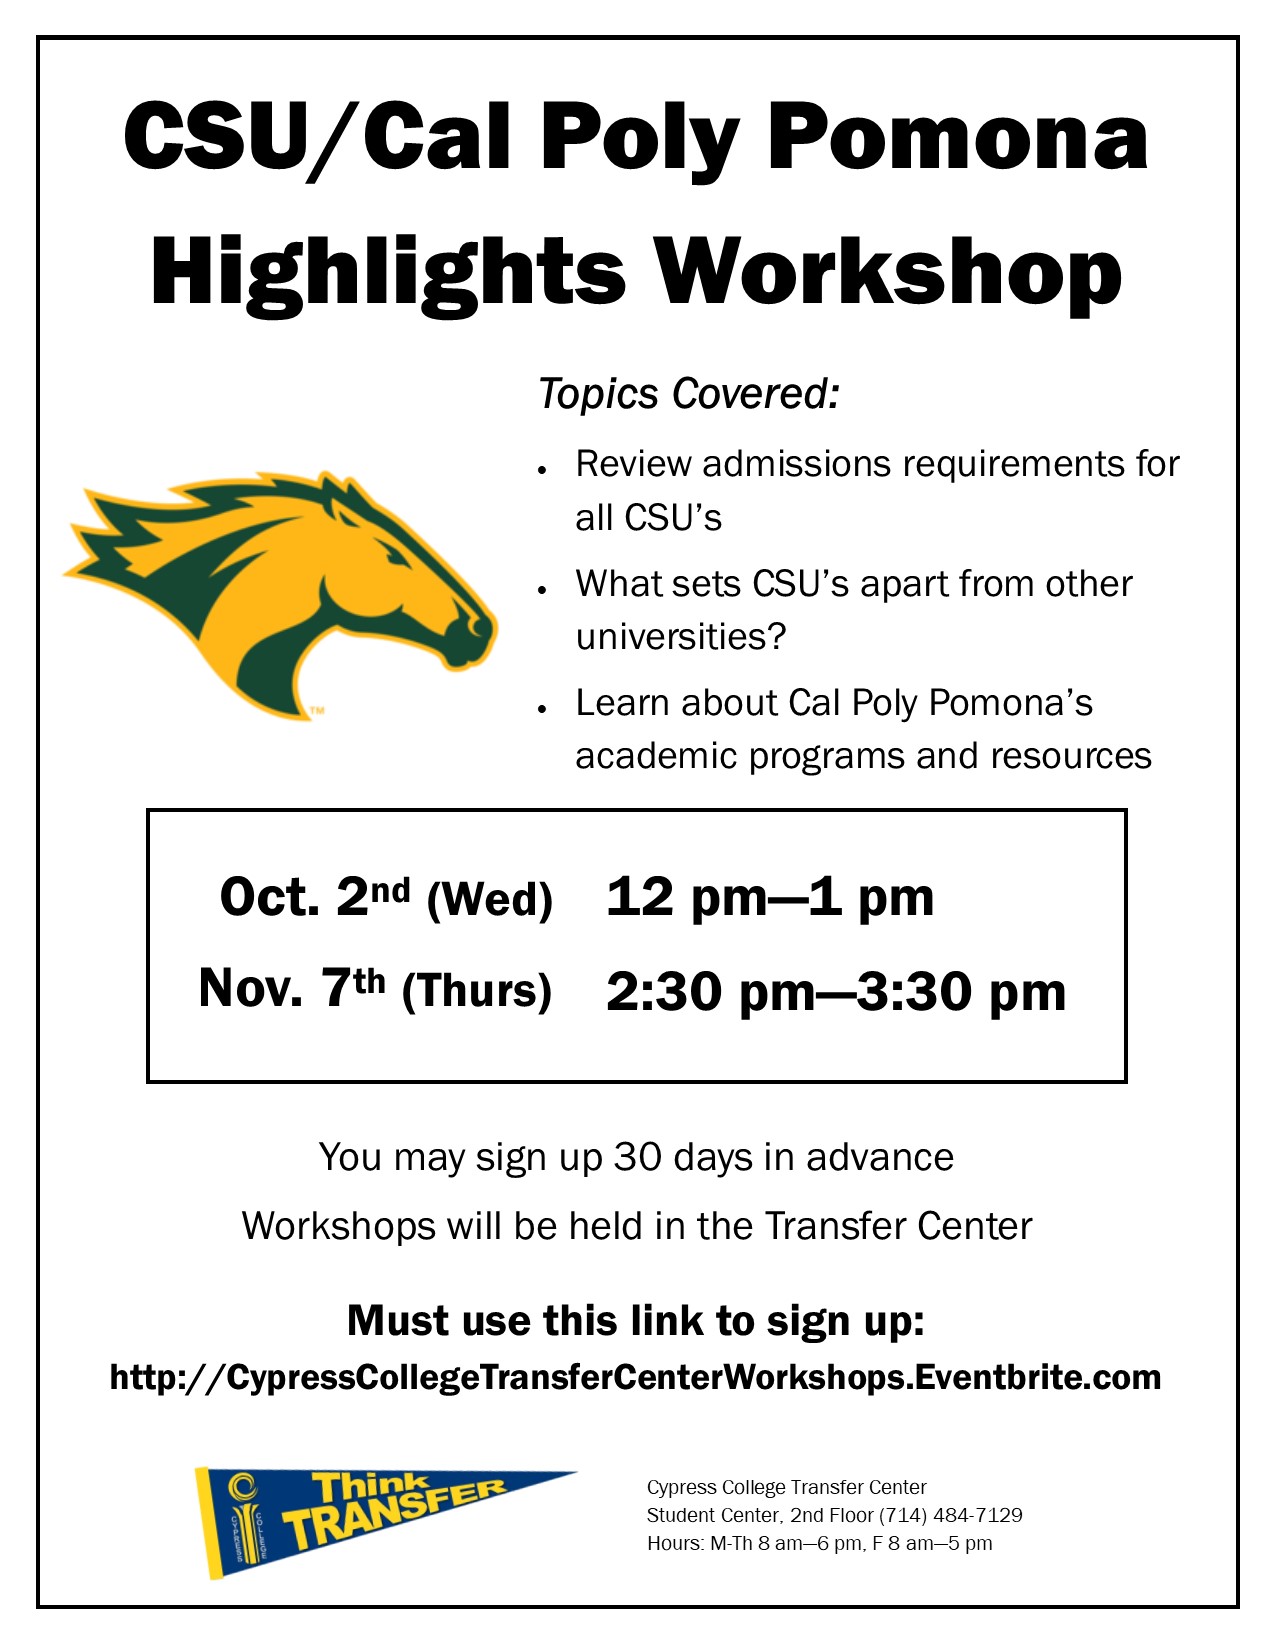 2019 CSU/Cal Poly Pomona Highlights Workshop dates and times